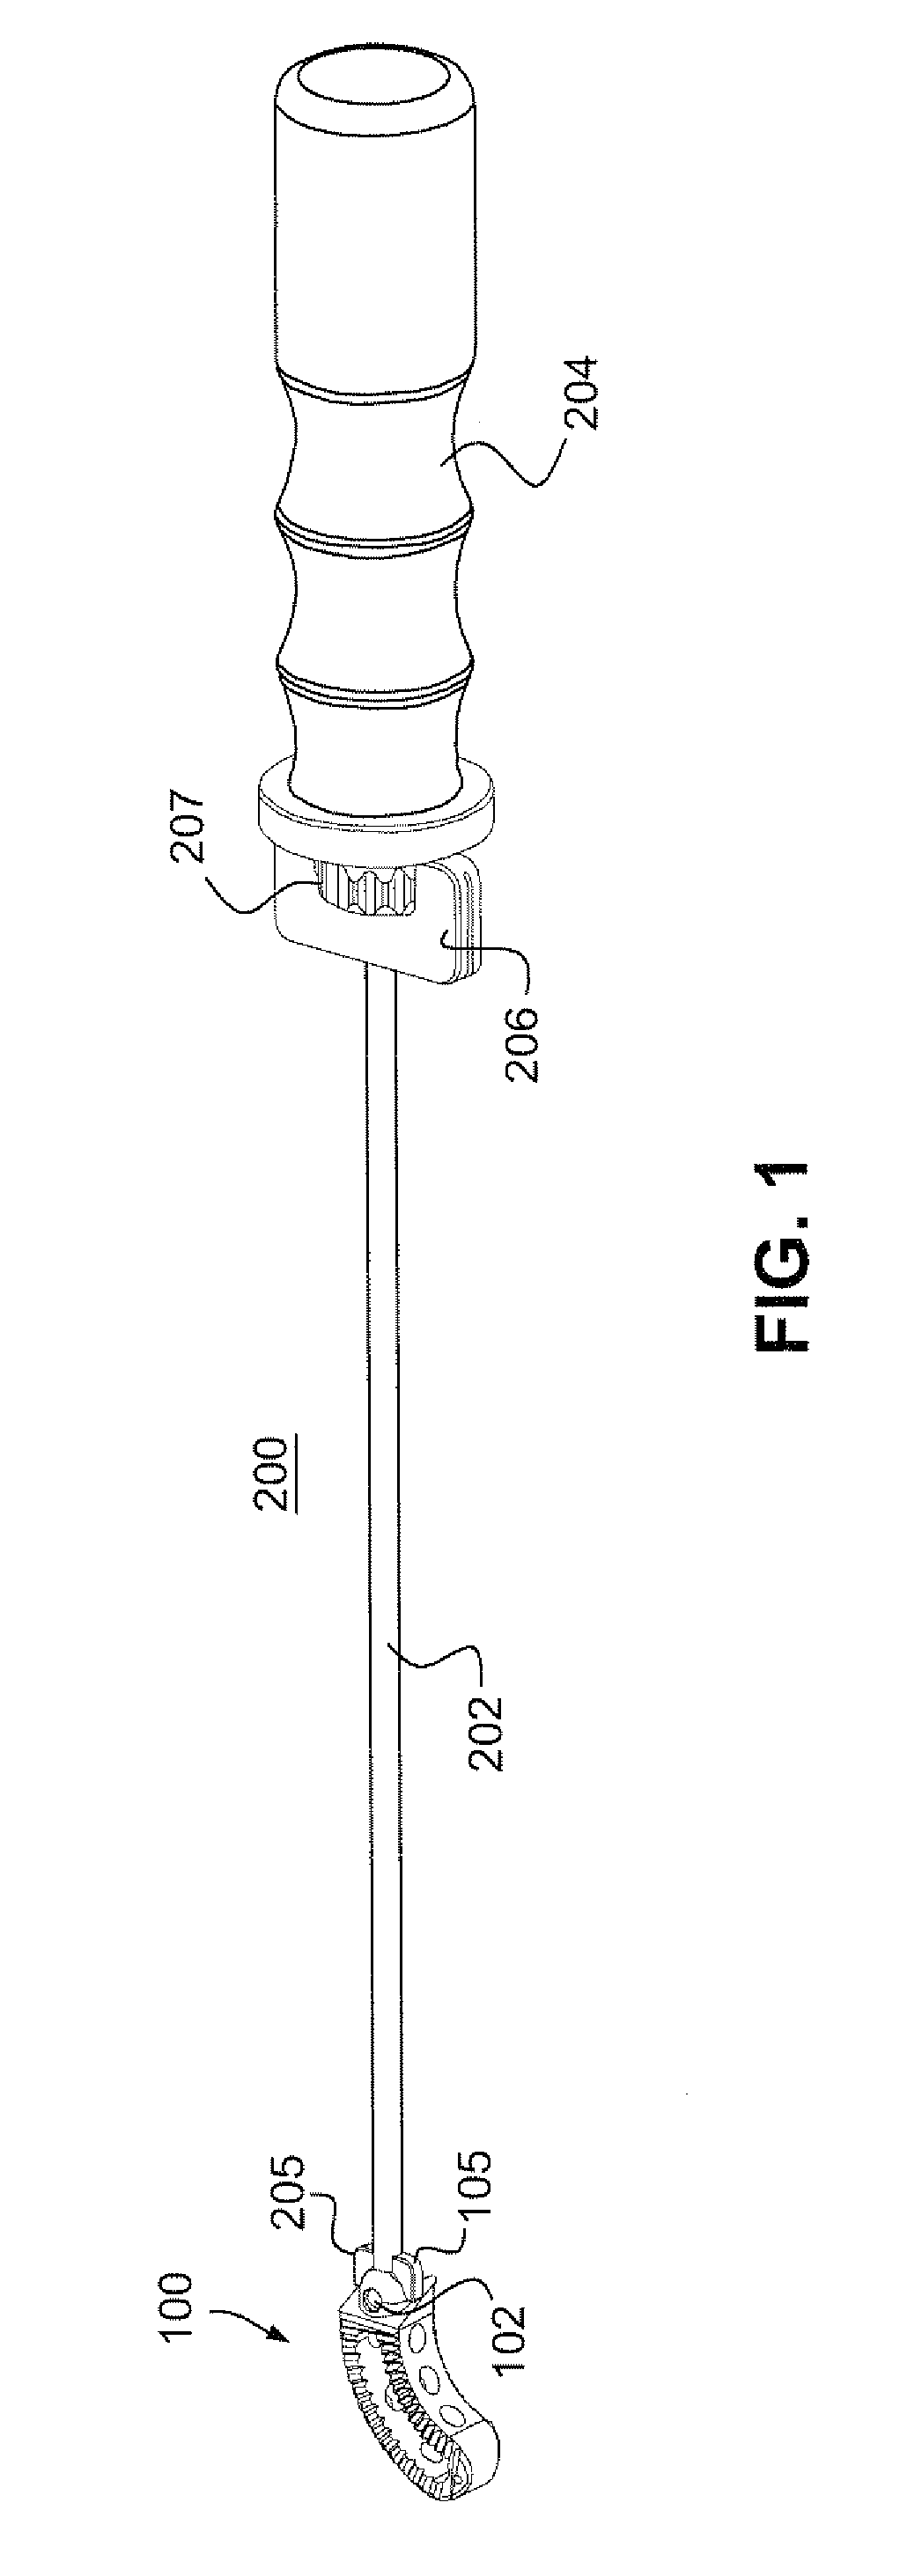 Steerable spine implant insertion device and method